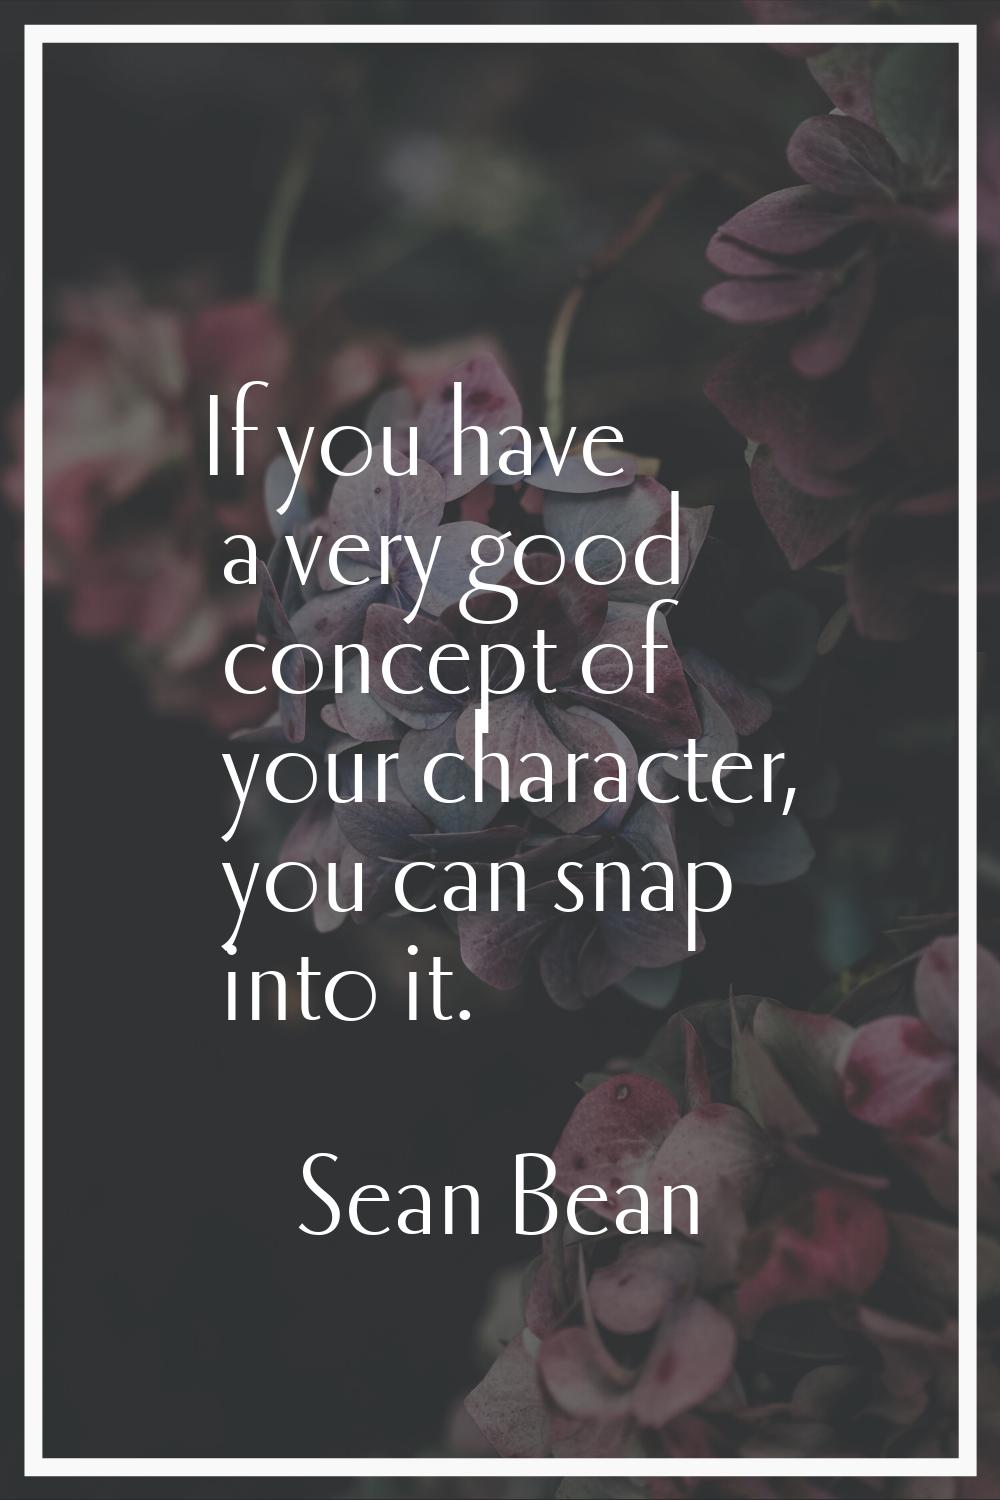 If you have a very good concept of your character, you can snap into it.